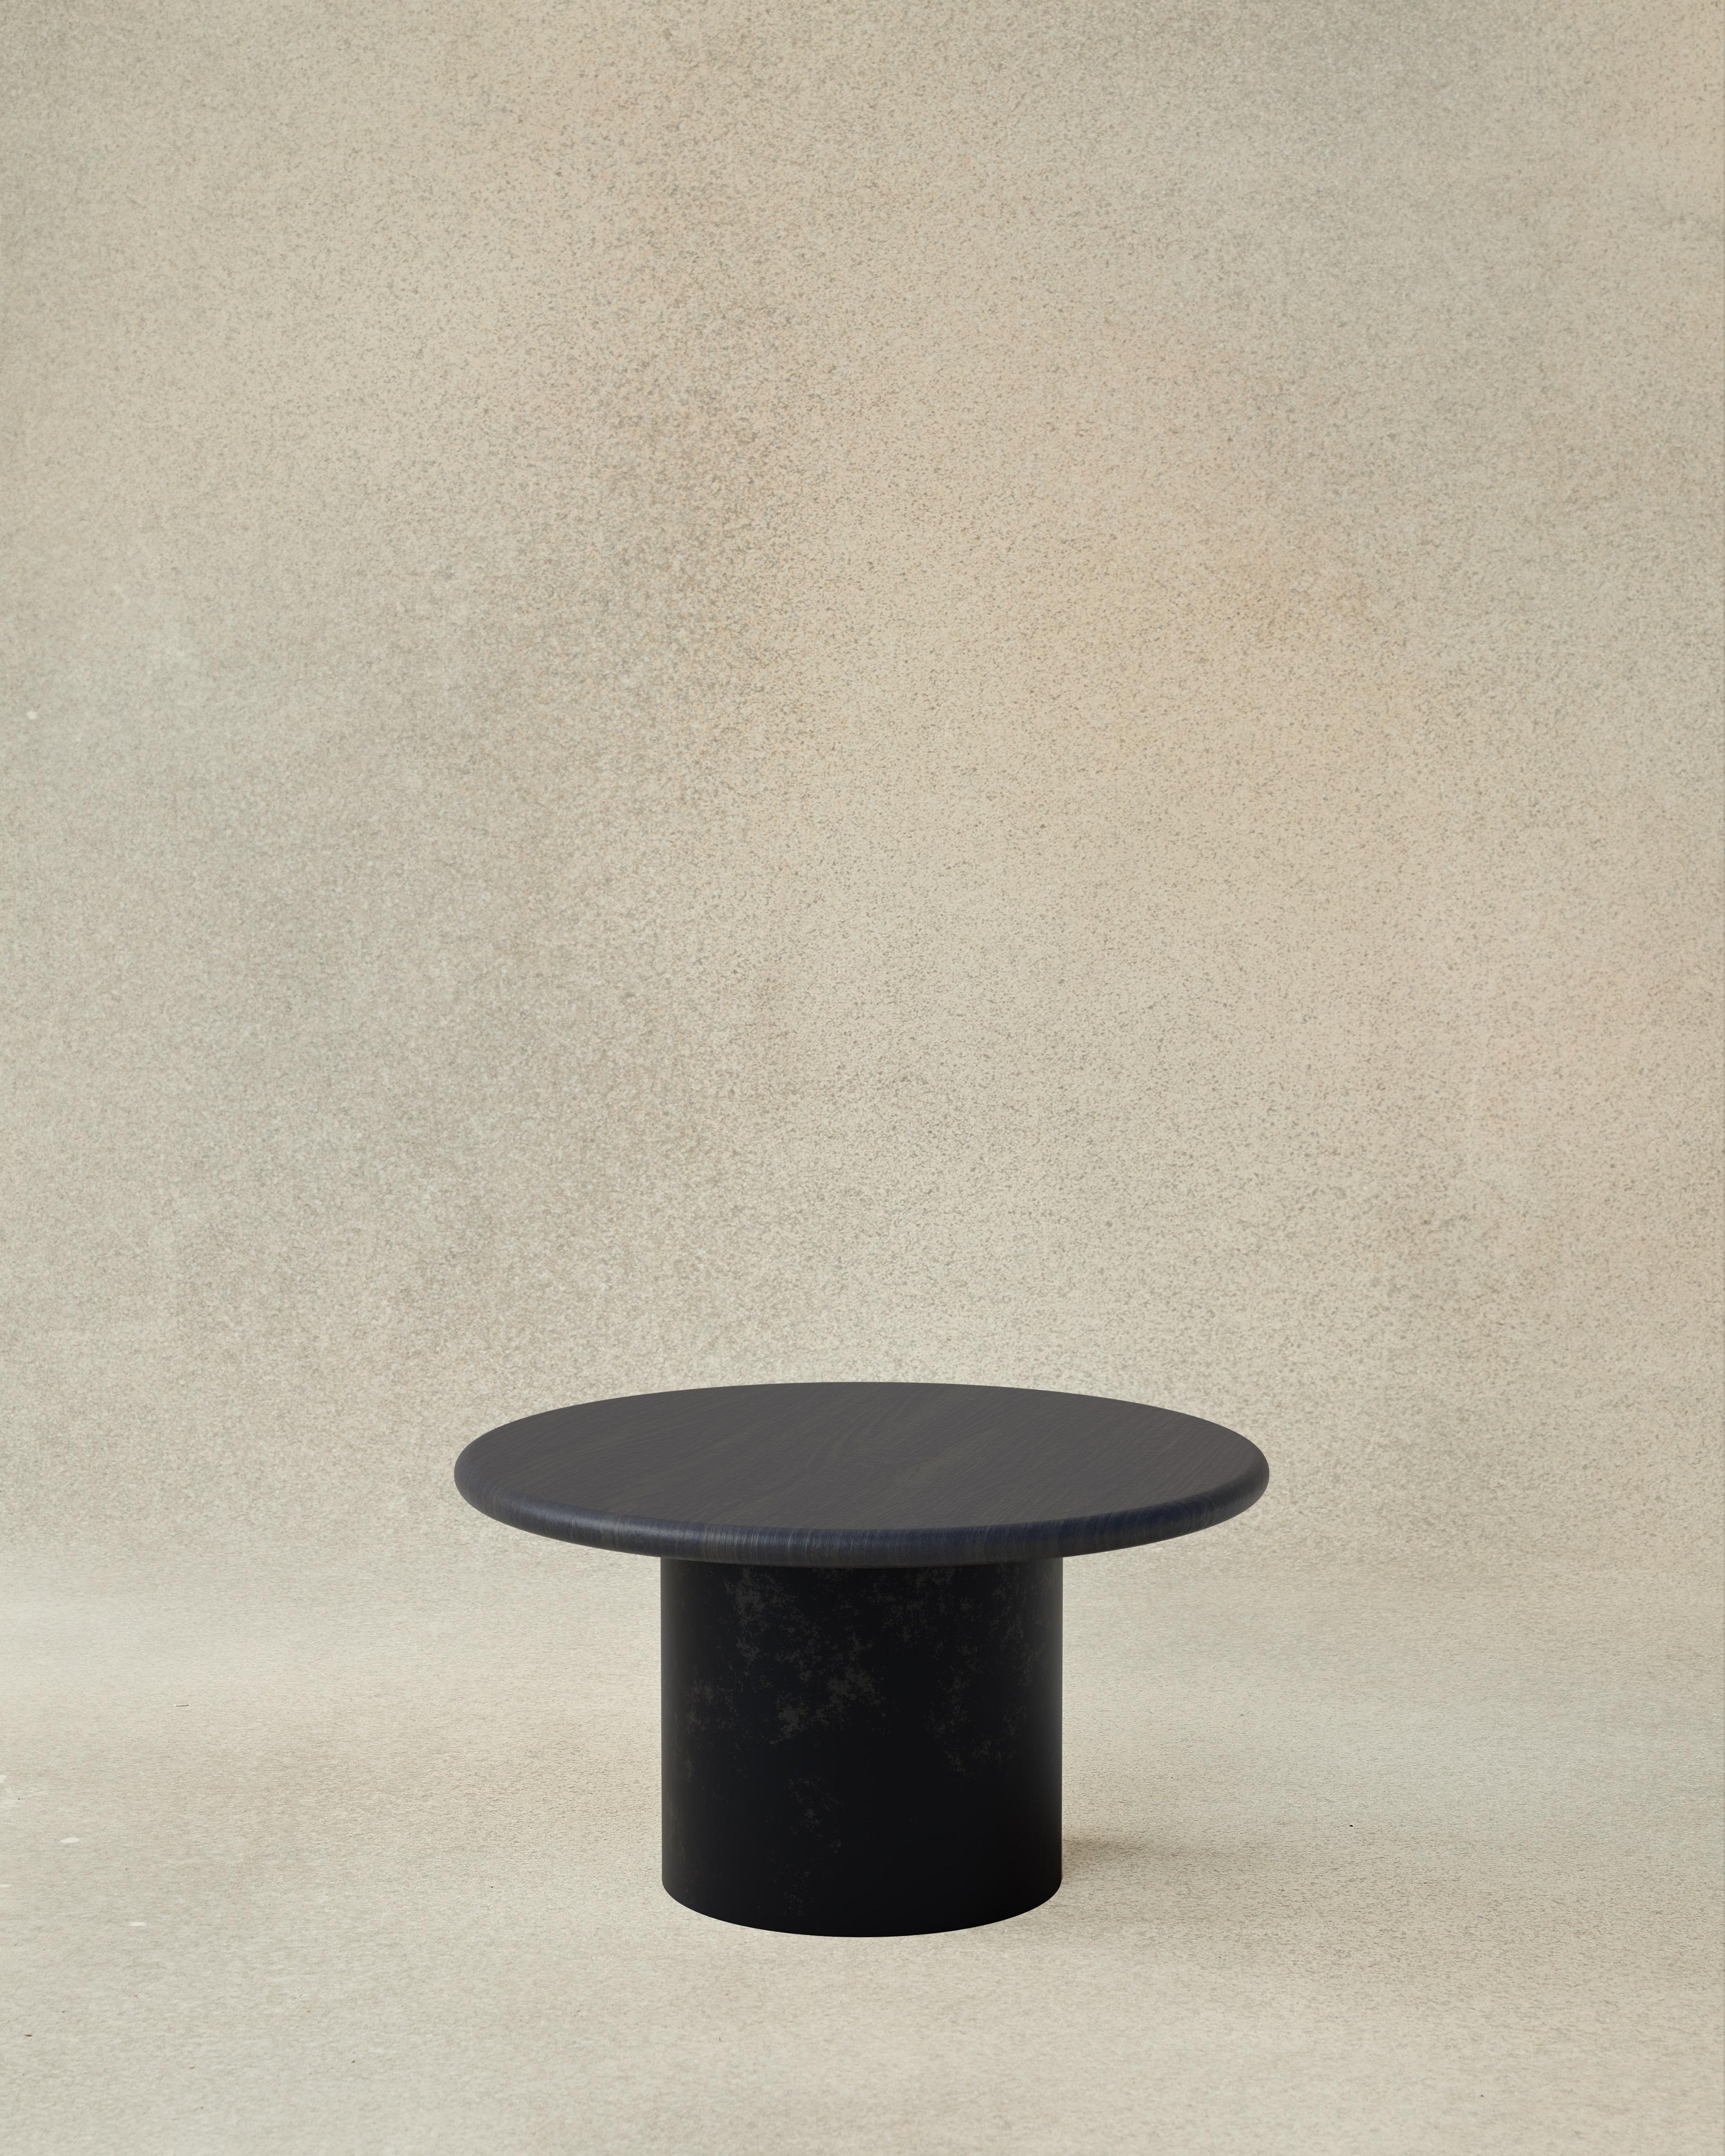 The Raindrop 600 is a mid sized Raindrop, falling within the coffee table set but equally a perfectly sized Side Table for your home and now available in a range of finishes to suit any interior or style. The raindrops nestle together to form a